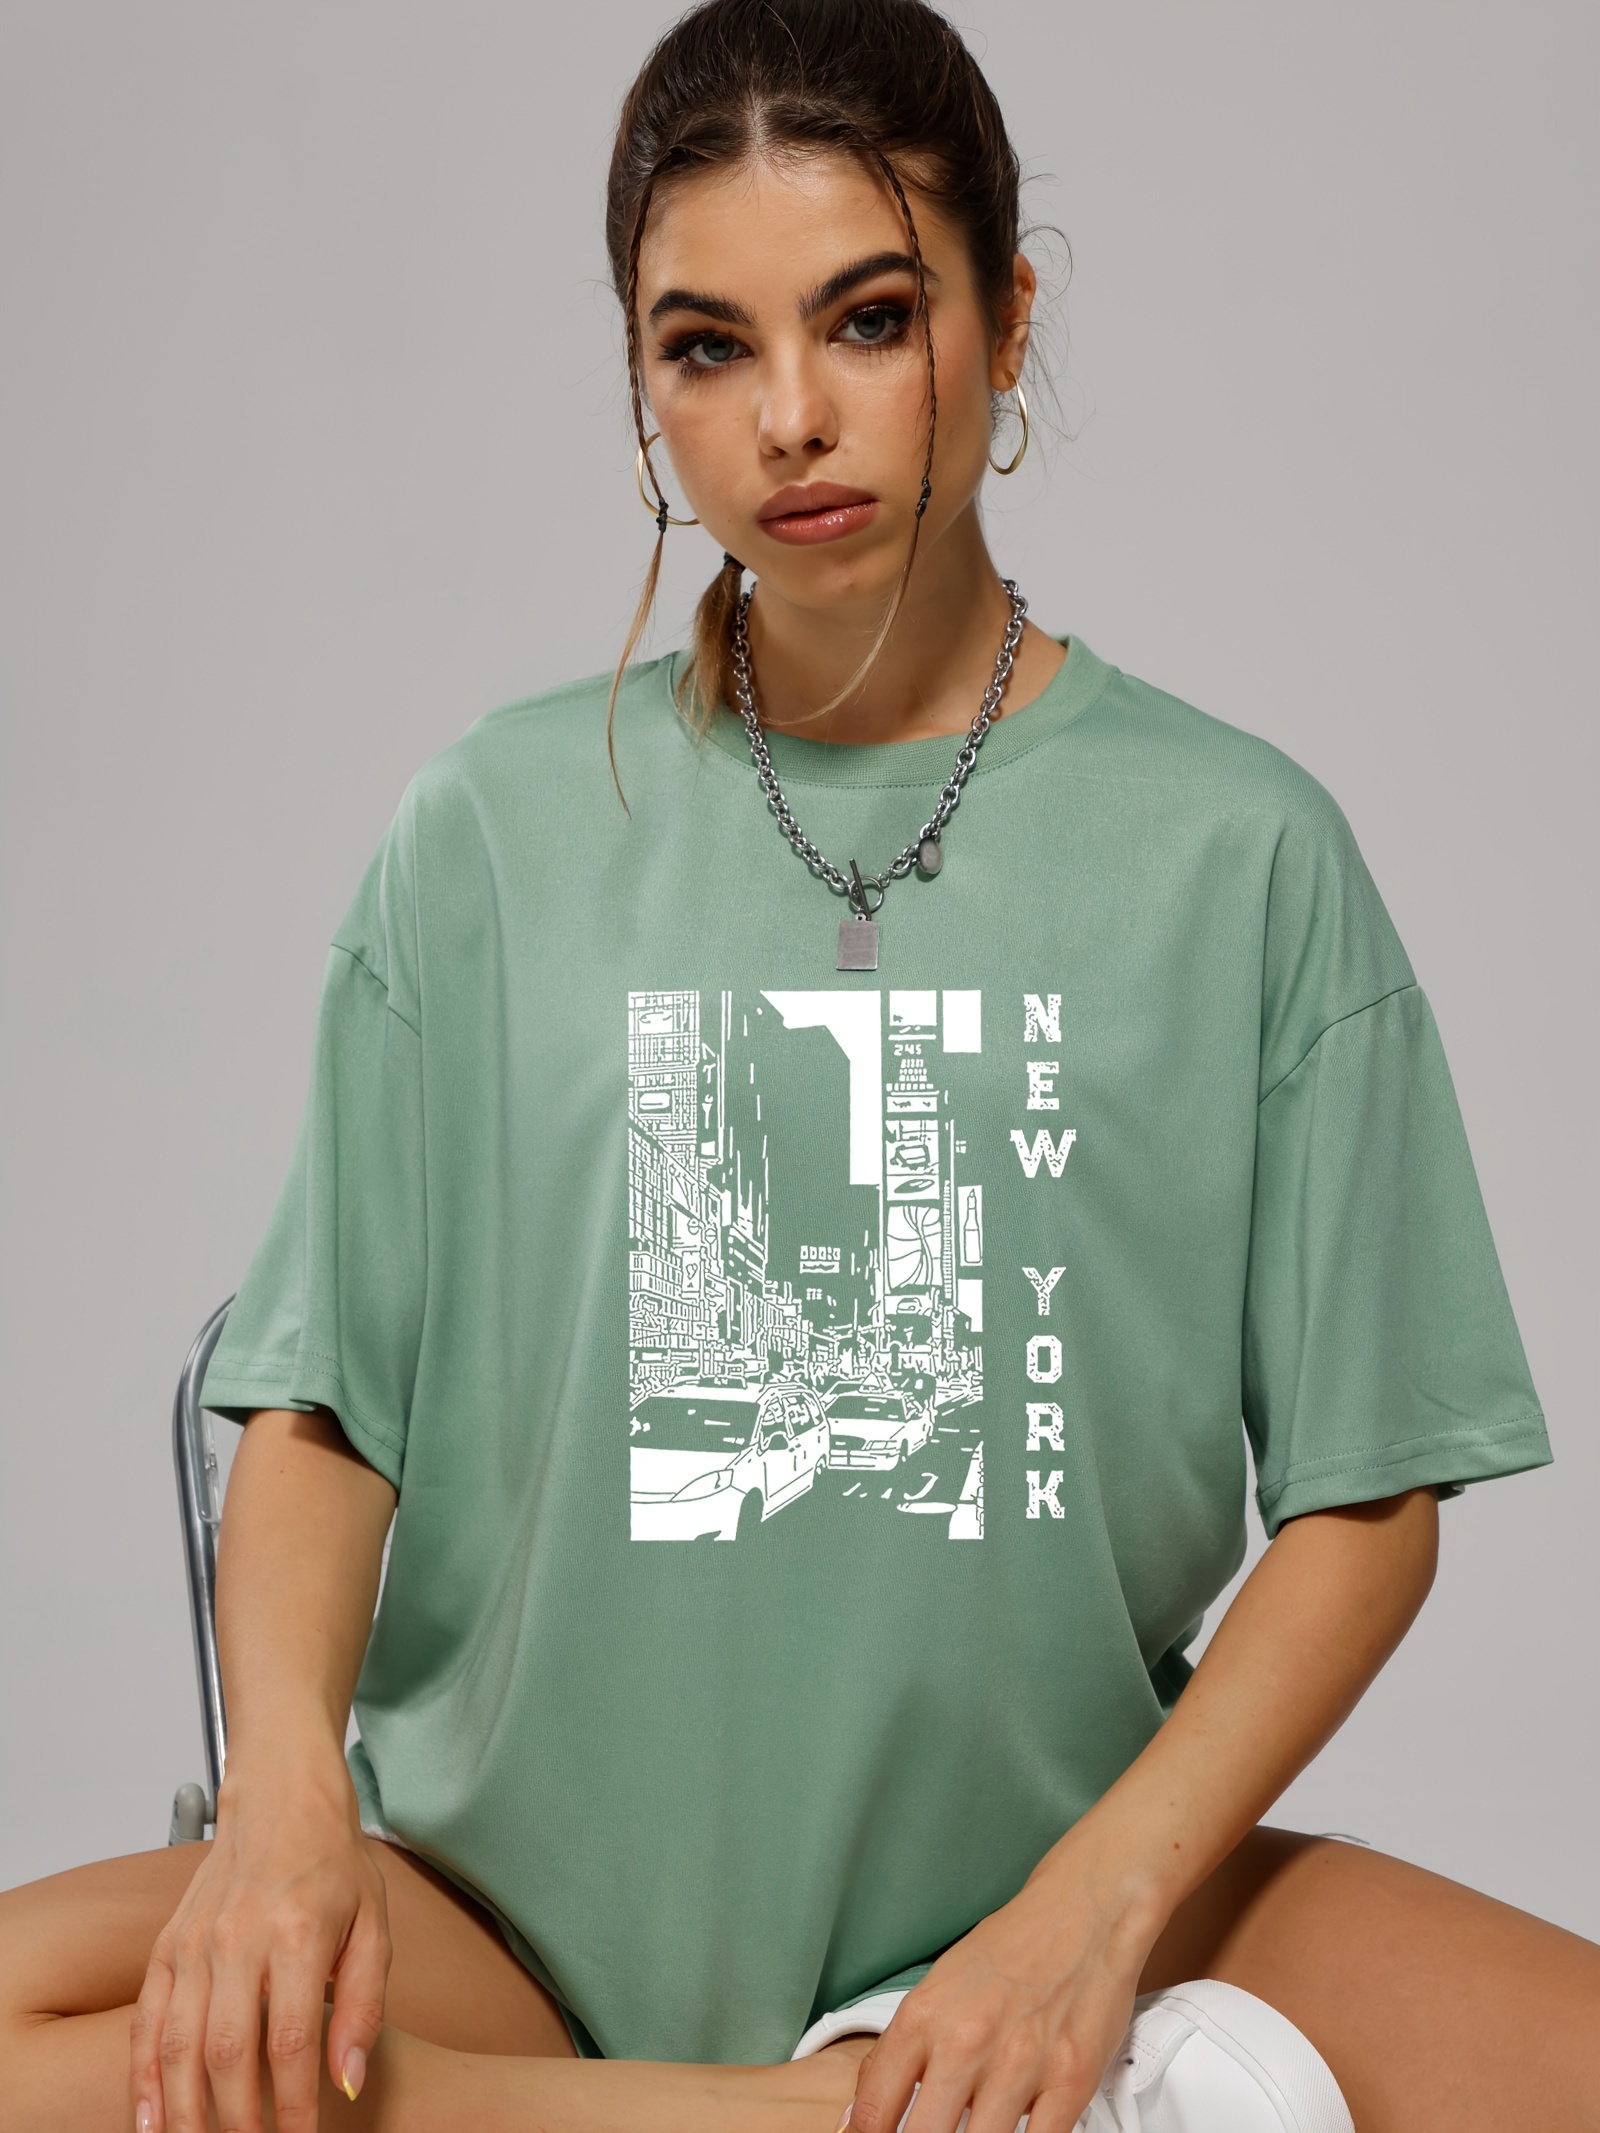 Cymmpu Women's Crewneck Tops Clearance Trendy T Shirts Sweet Old Lady Letter Printing Pullover Basic Tees Clothes for 2023 Casual Short Sleeve Shirts